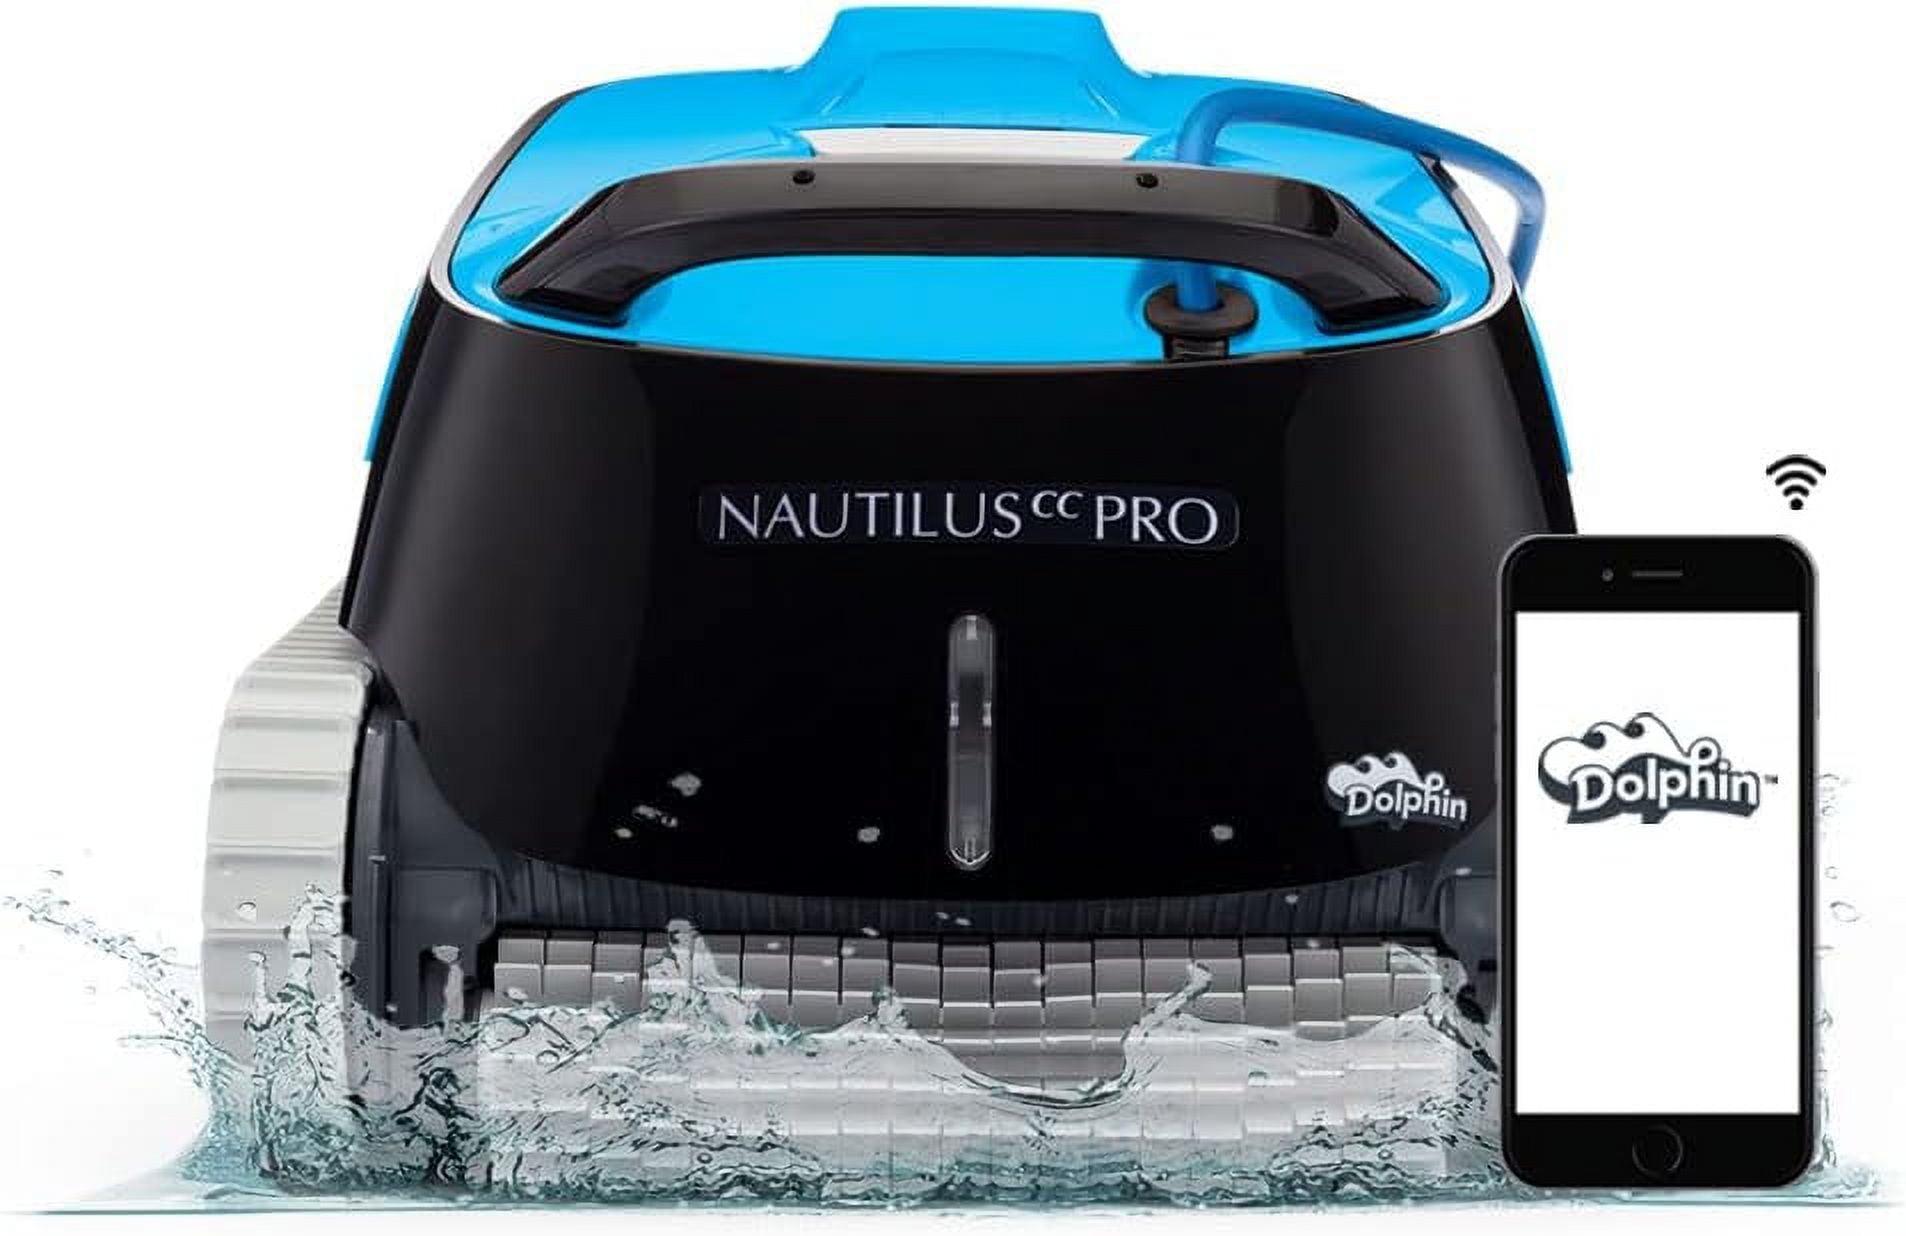 Dolphin Nautilus CC Pro with Wi-Fi Control Ideal for all Pool